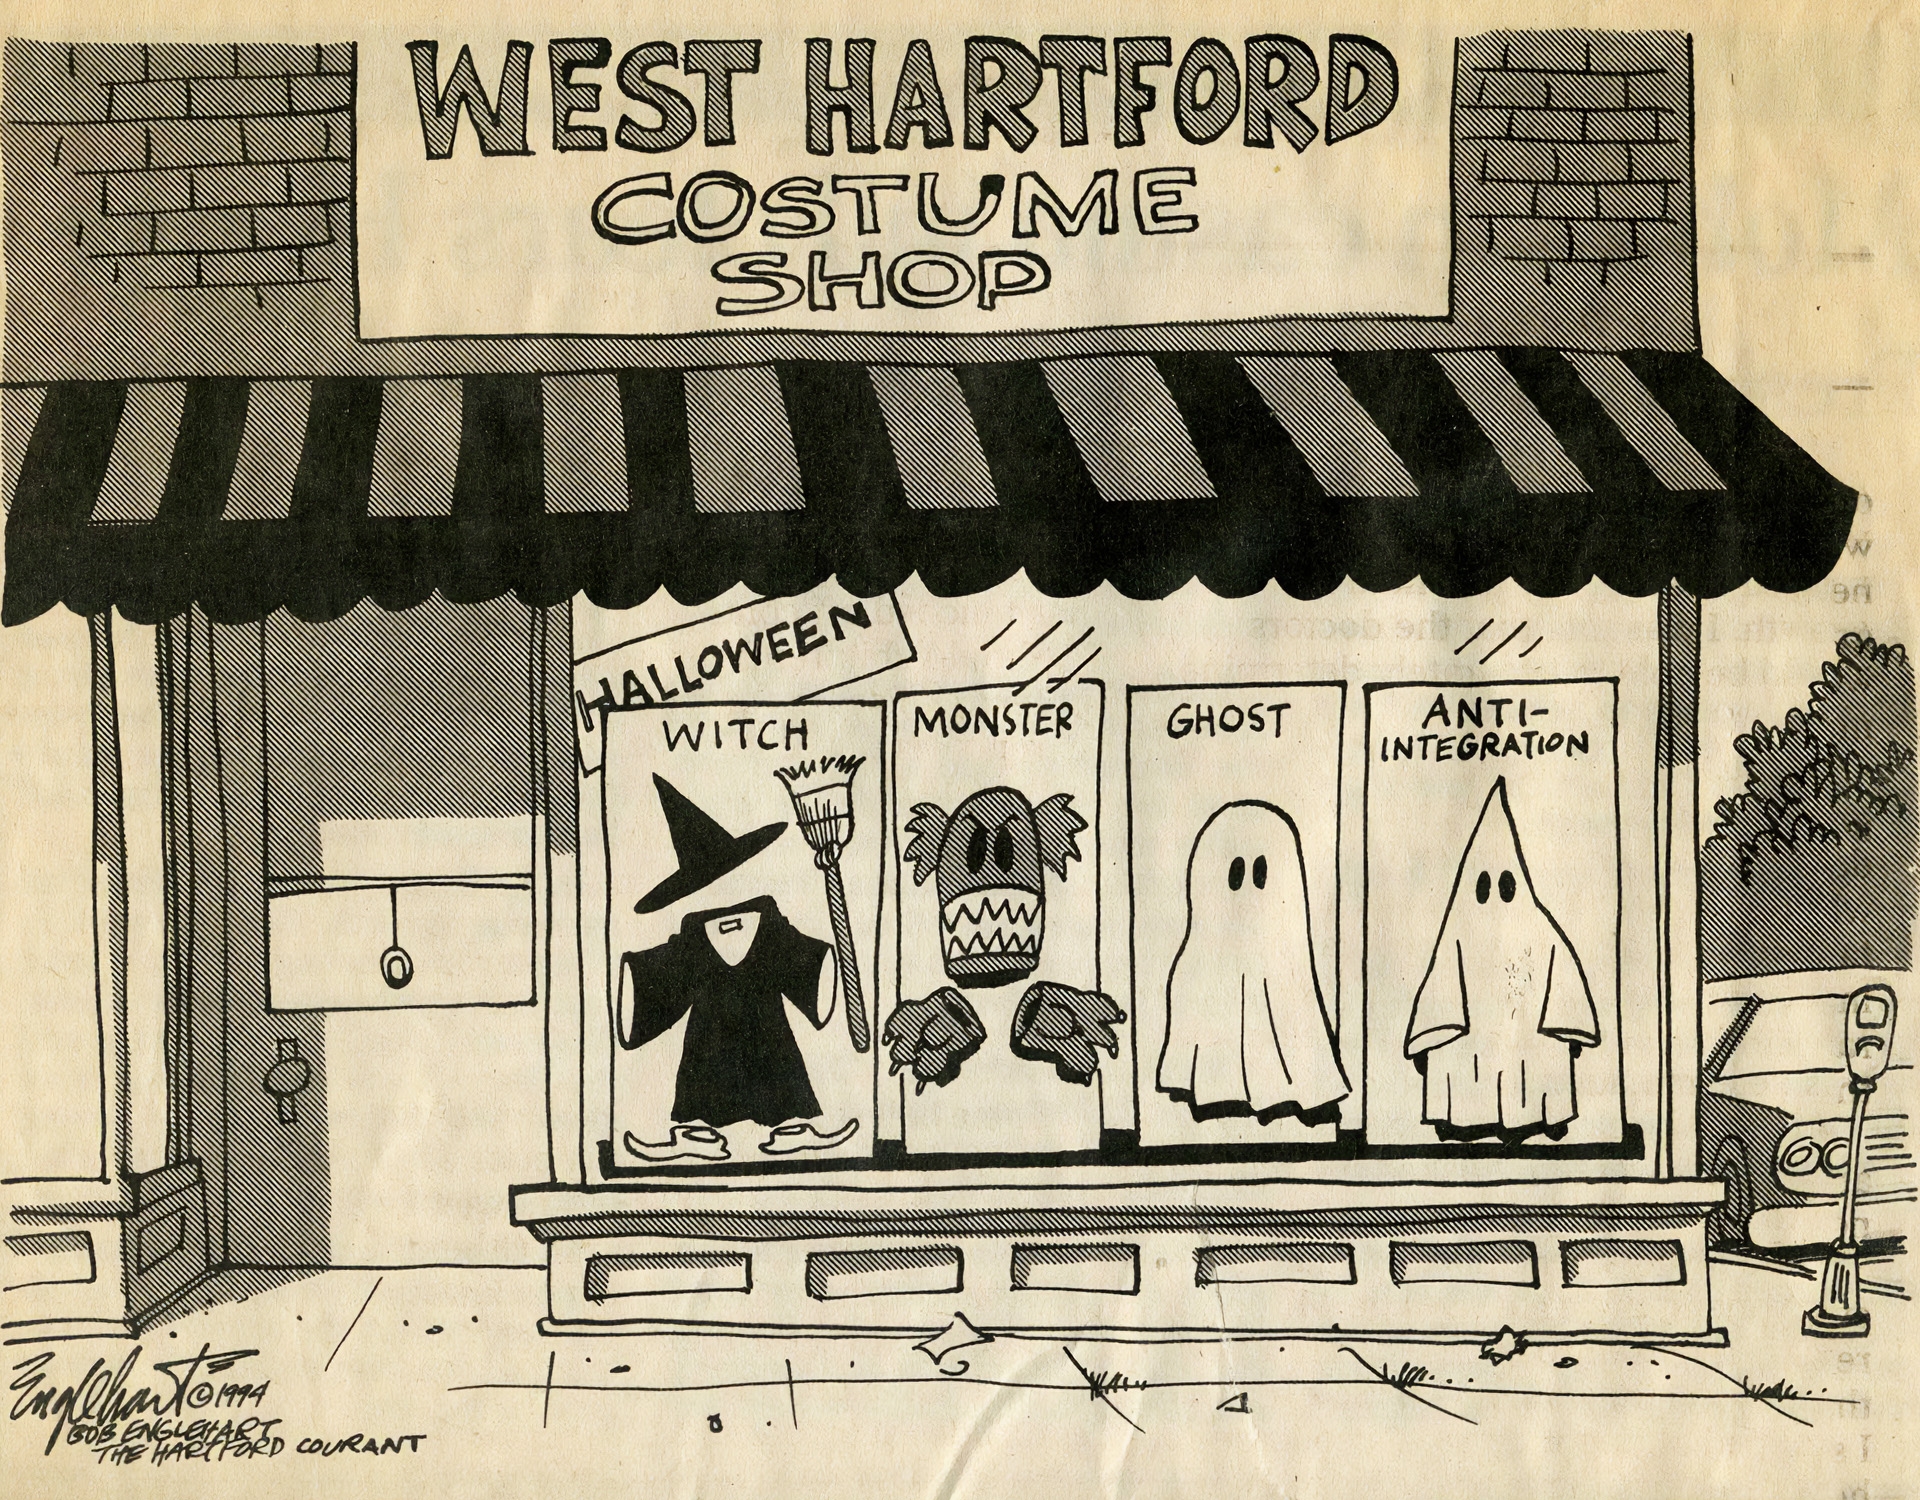 This cartoon from 1994 takes the harmless concept of a costume shop to a sinister level - one of the costumes in the shop is a KKK robe with the title "anti-integration."